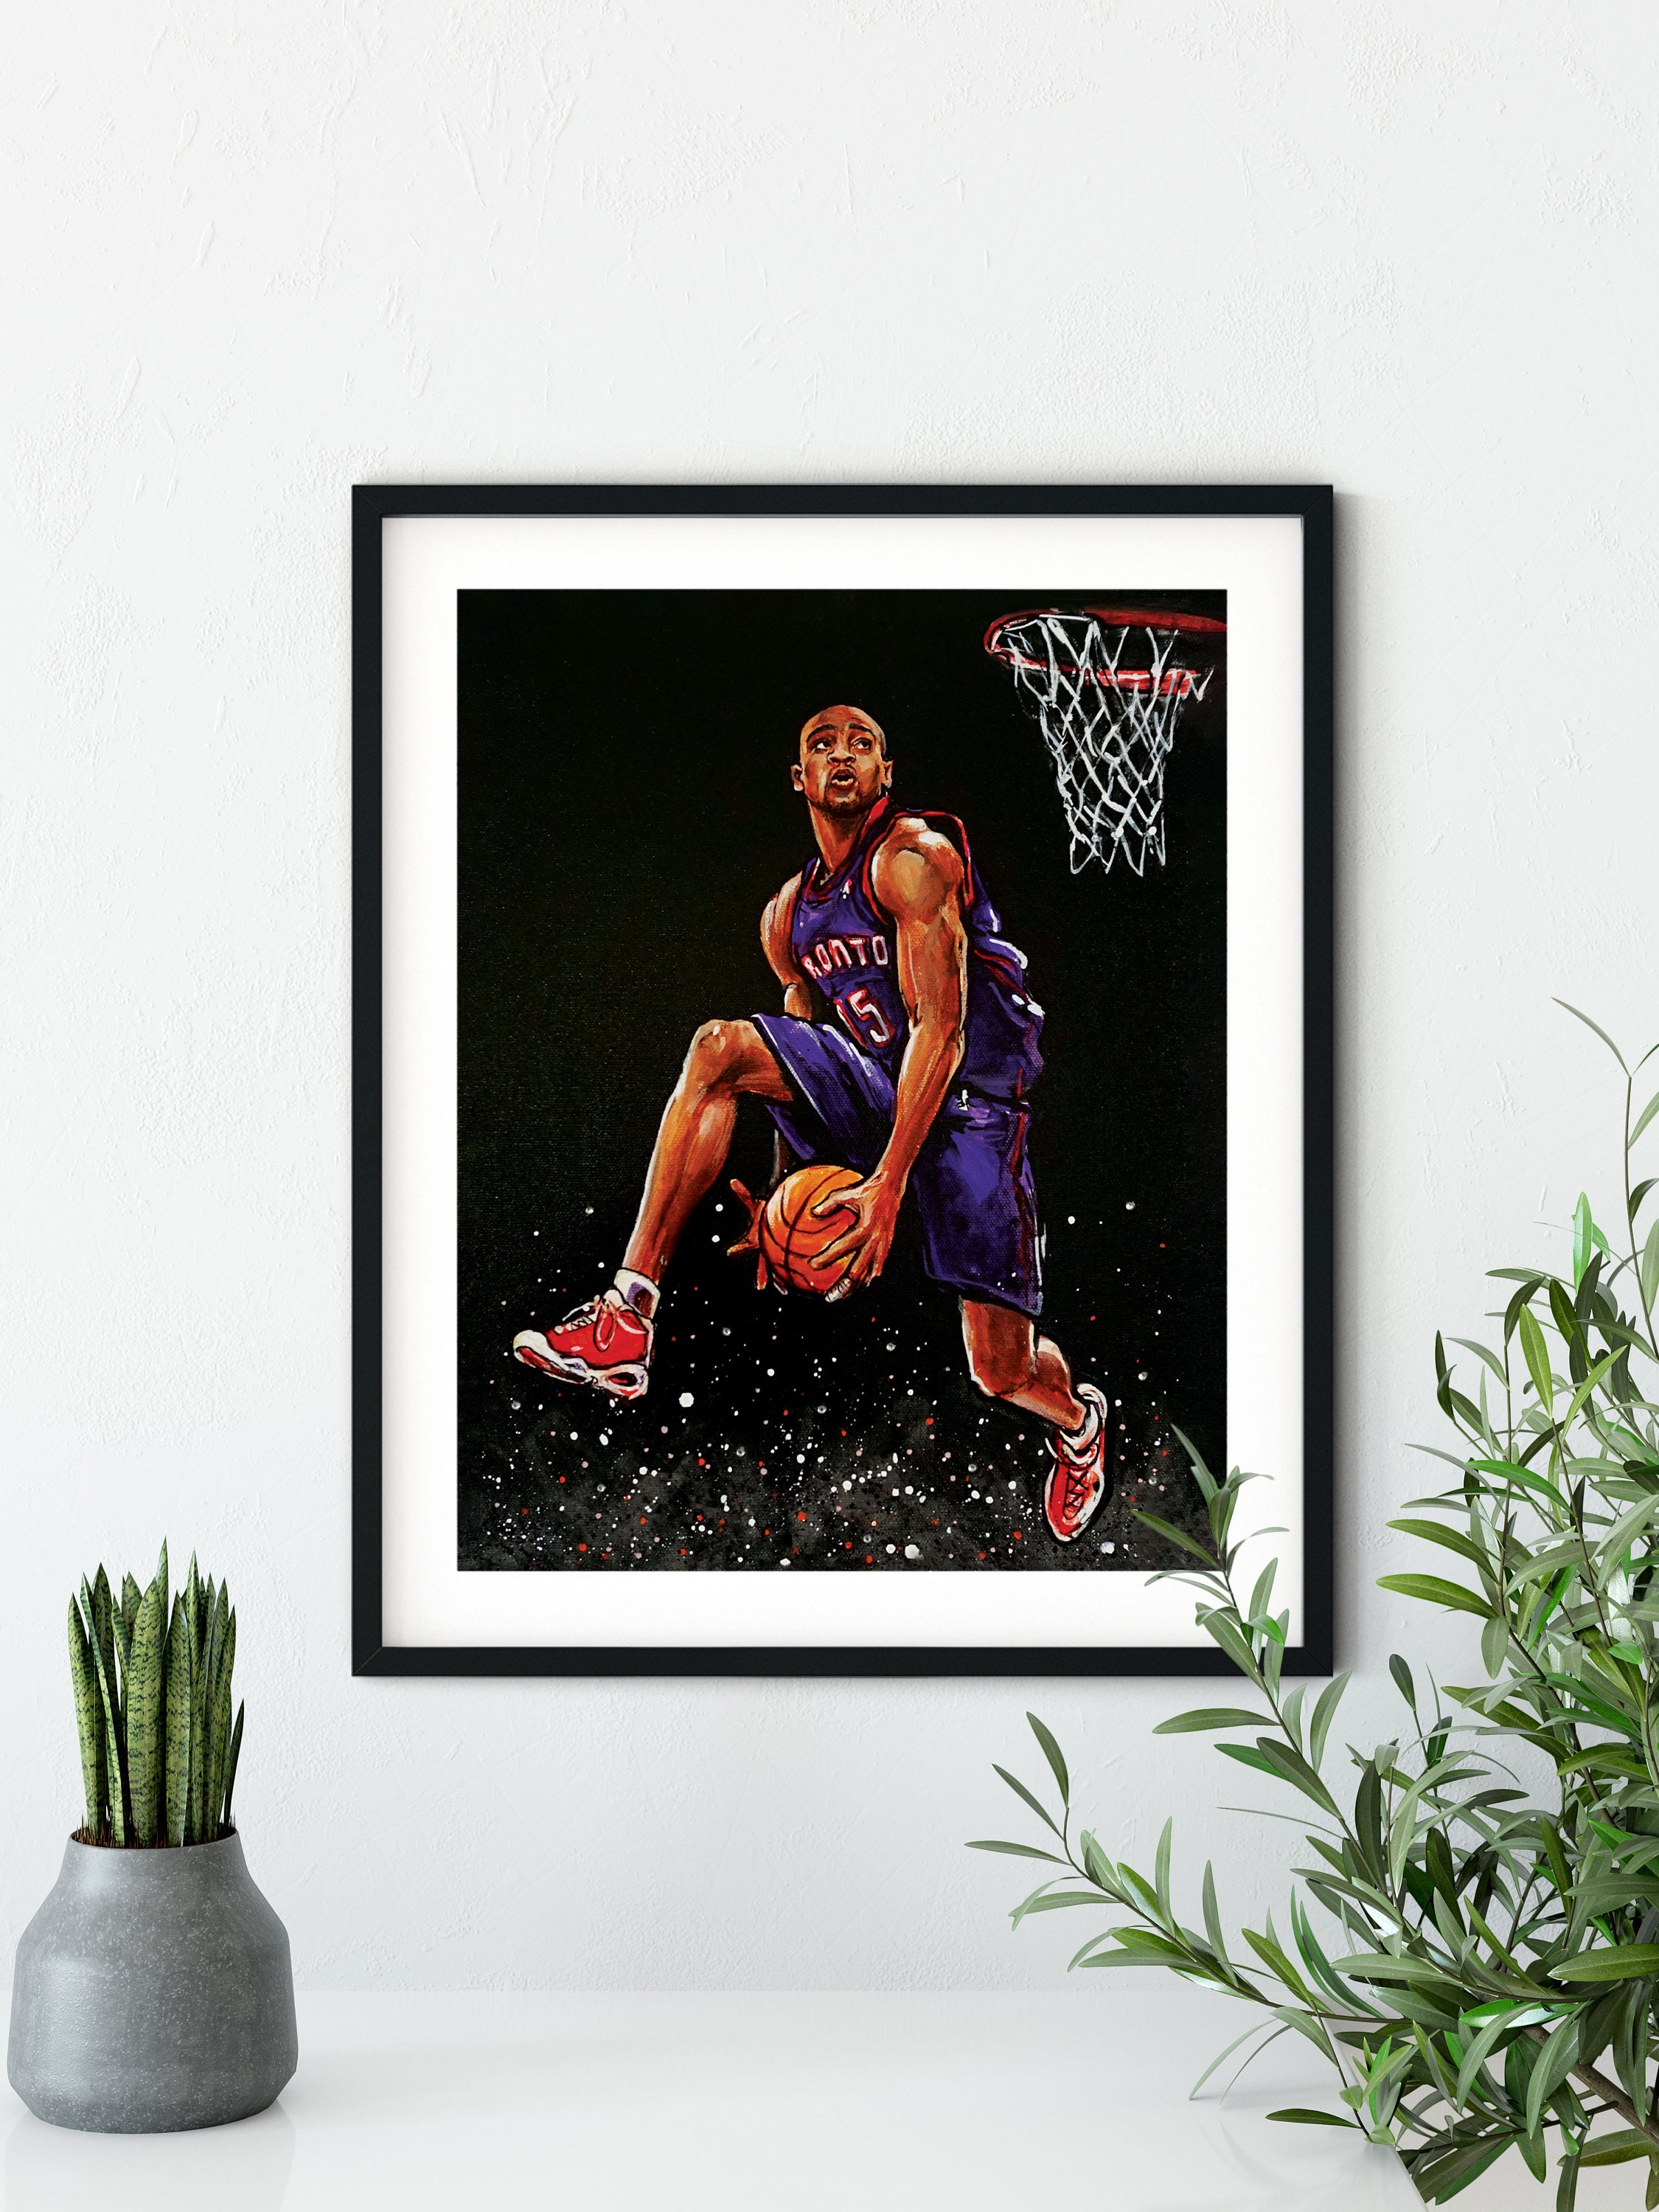  MasonArts Vince Carter 24inch x 30inch Silk Poster Dunk And  Shot Wallpaper Wall Decor Silk Prints for Home and Store : Tools & Home  Improvement